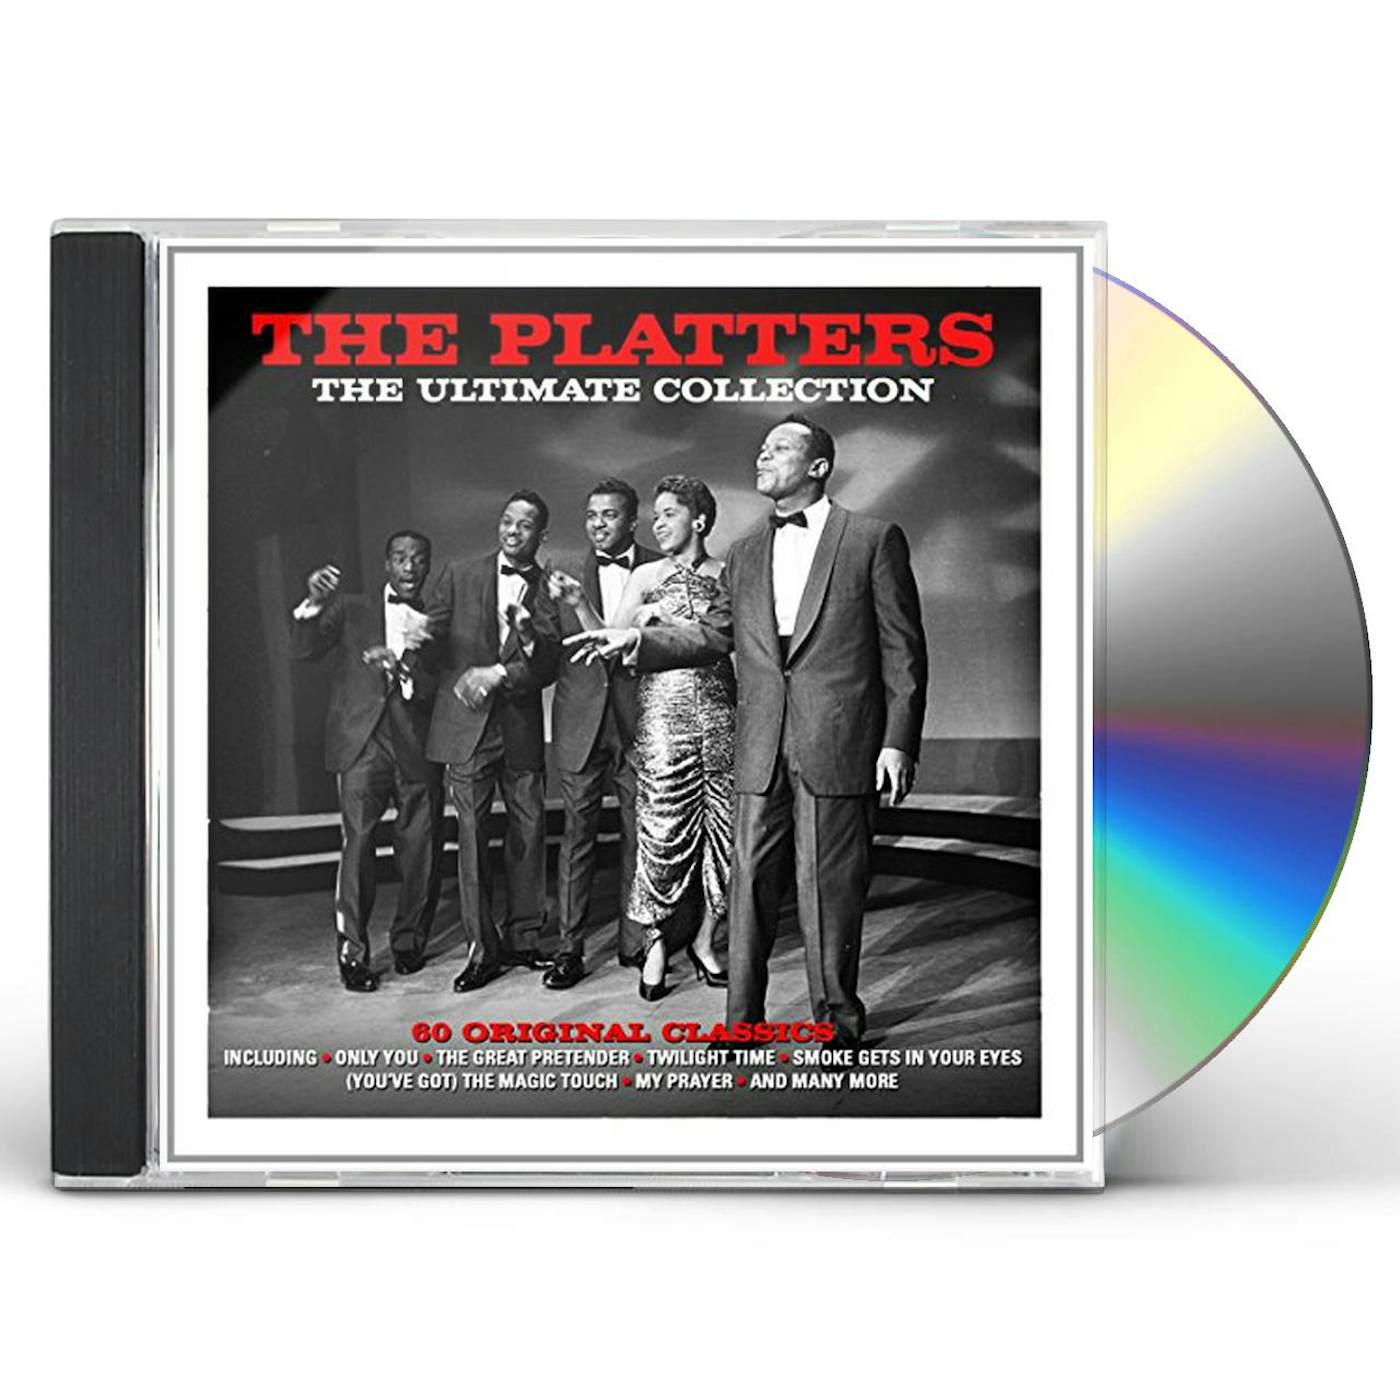 The Platters ULTIMATE COLLECTION CD